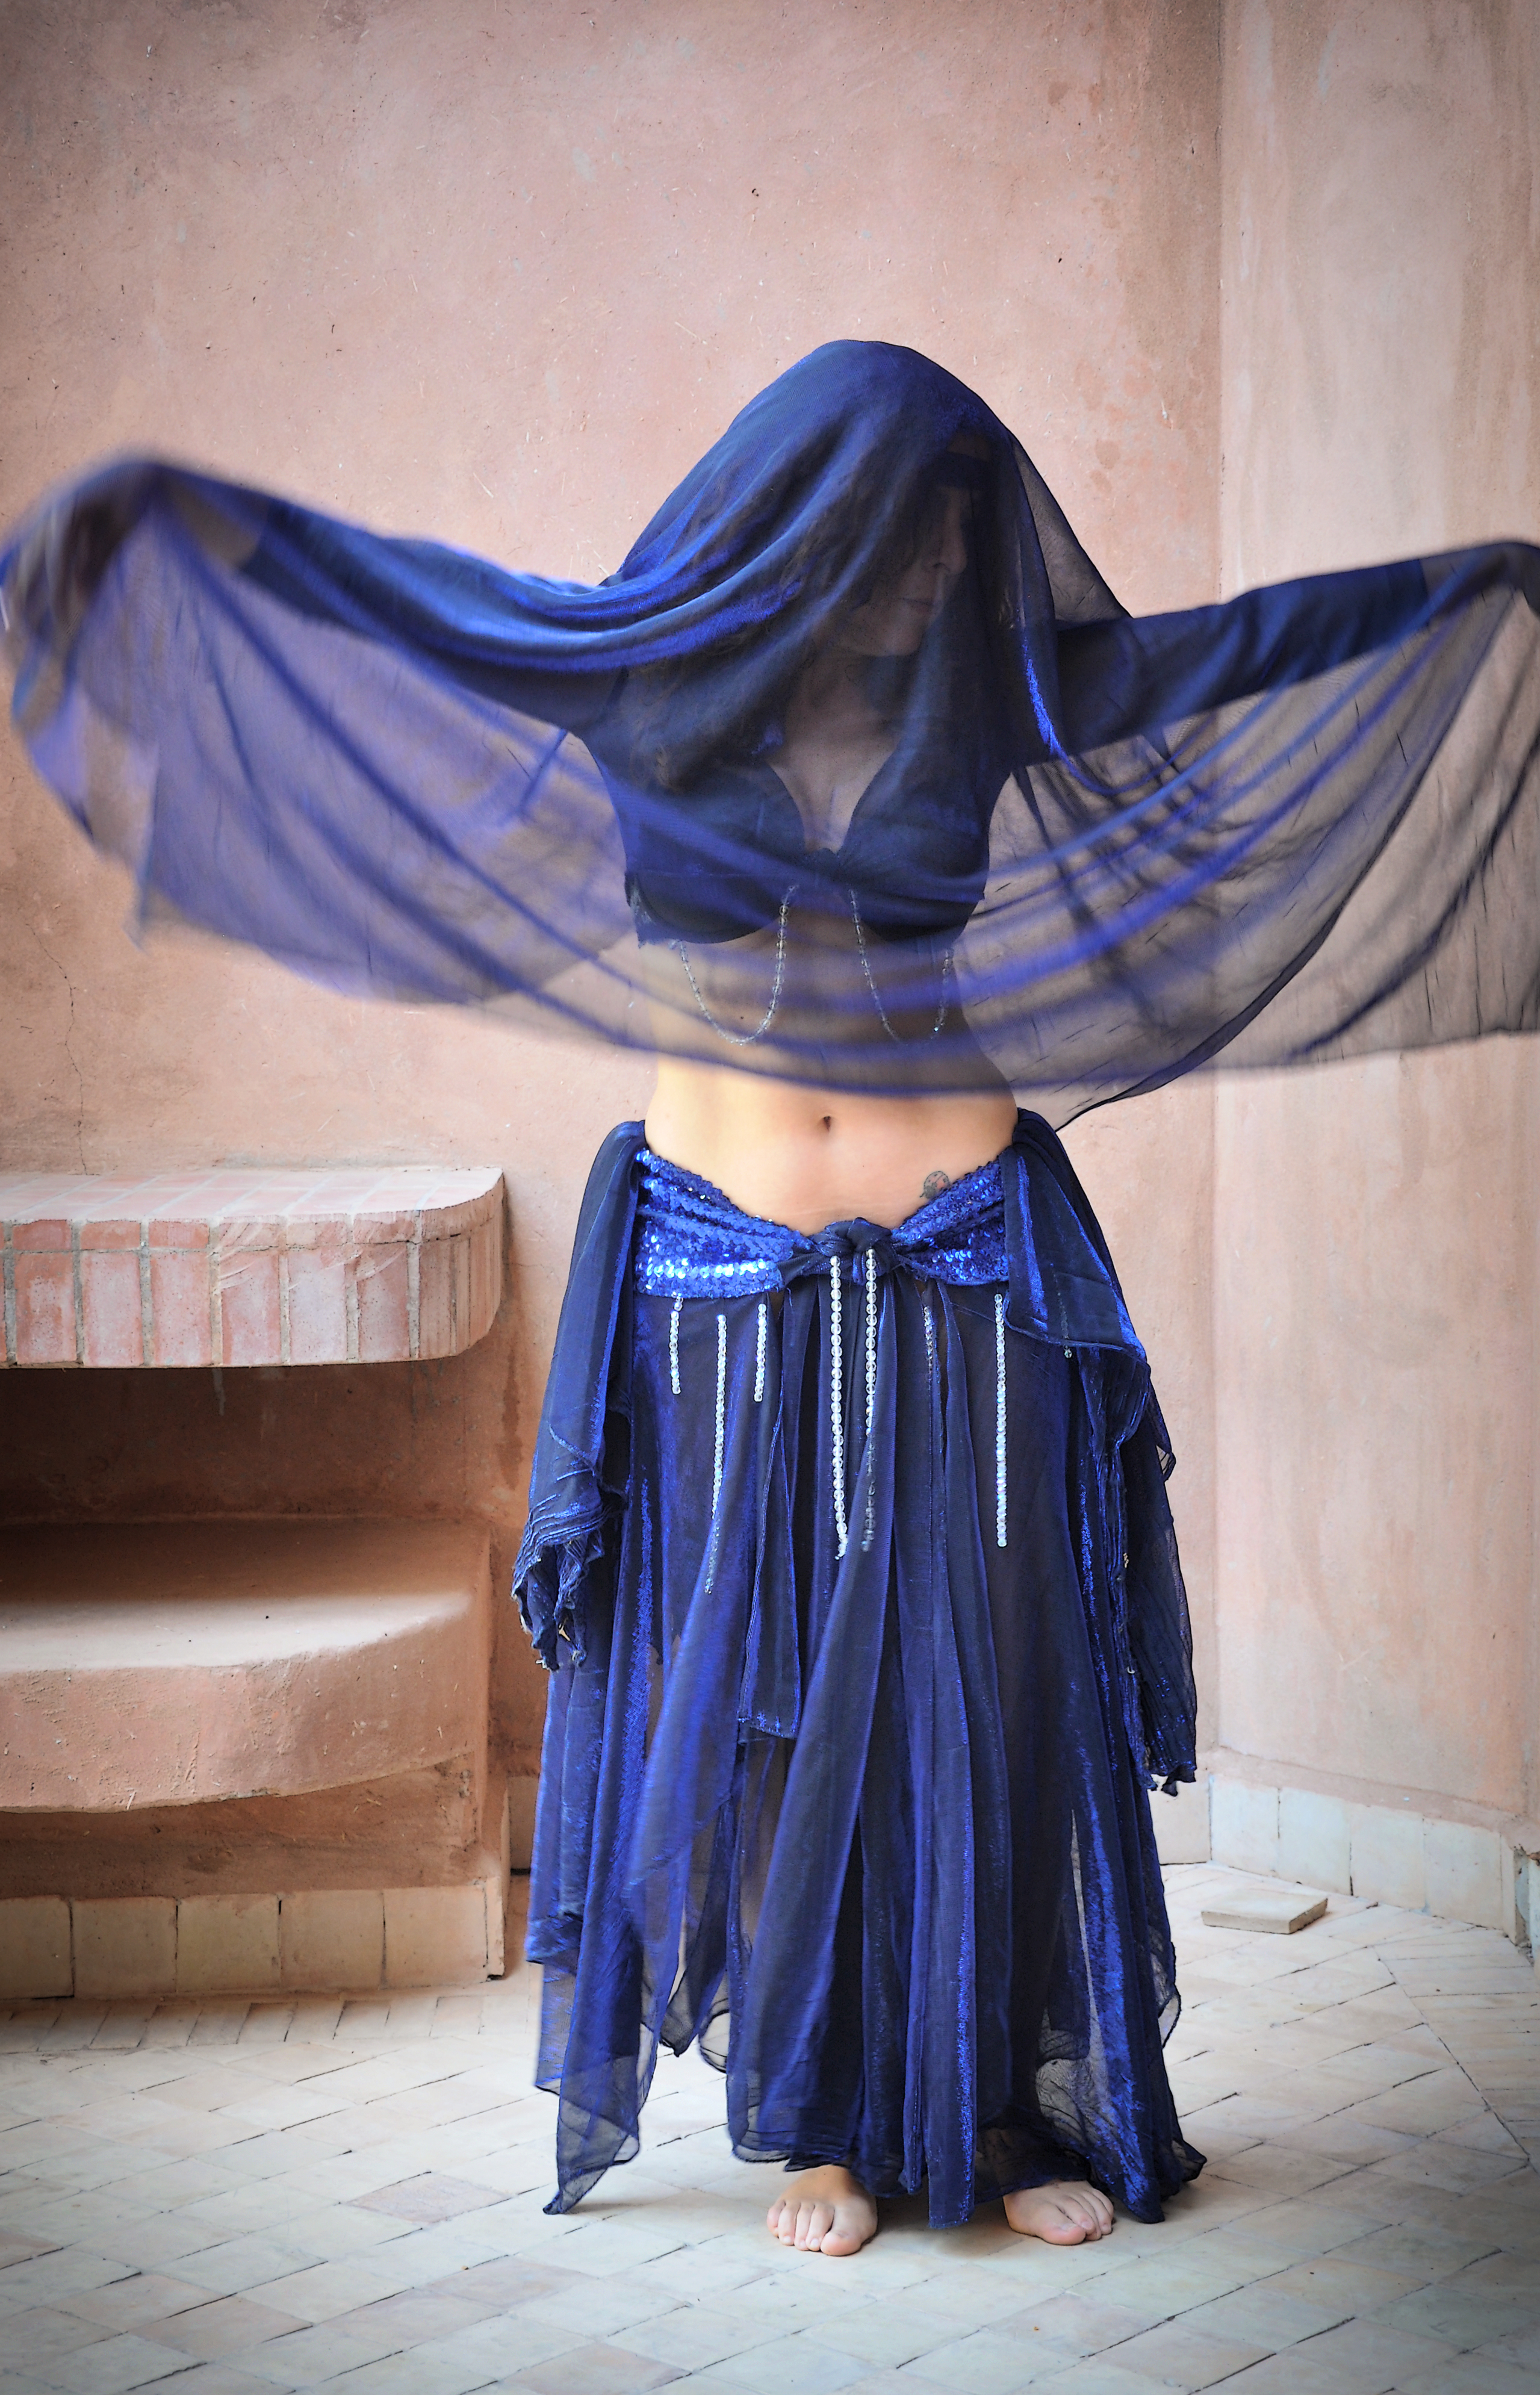 Woman belly dancing photo